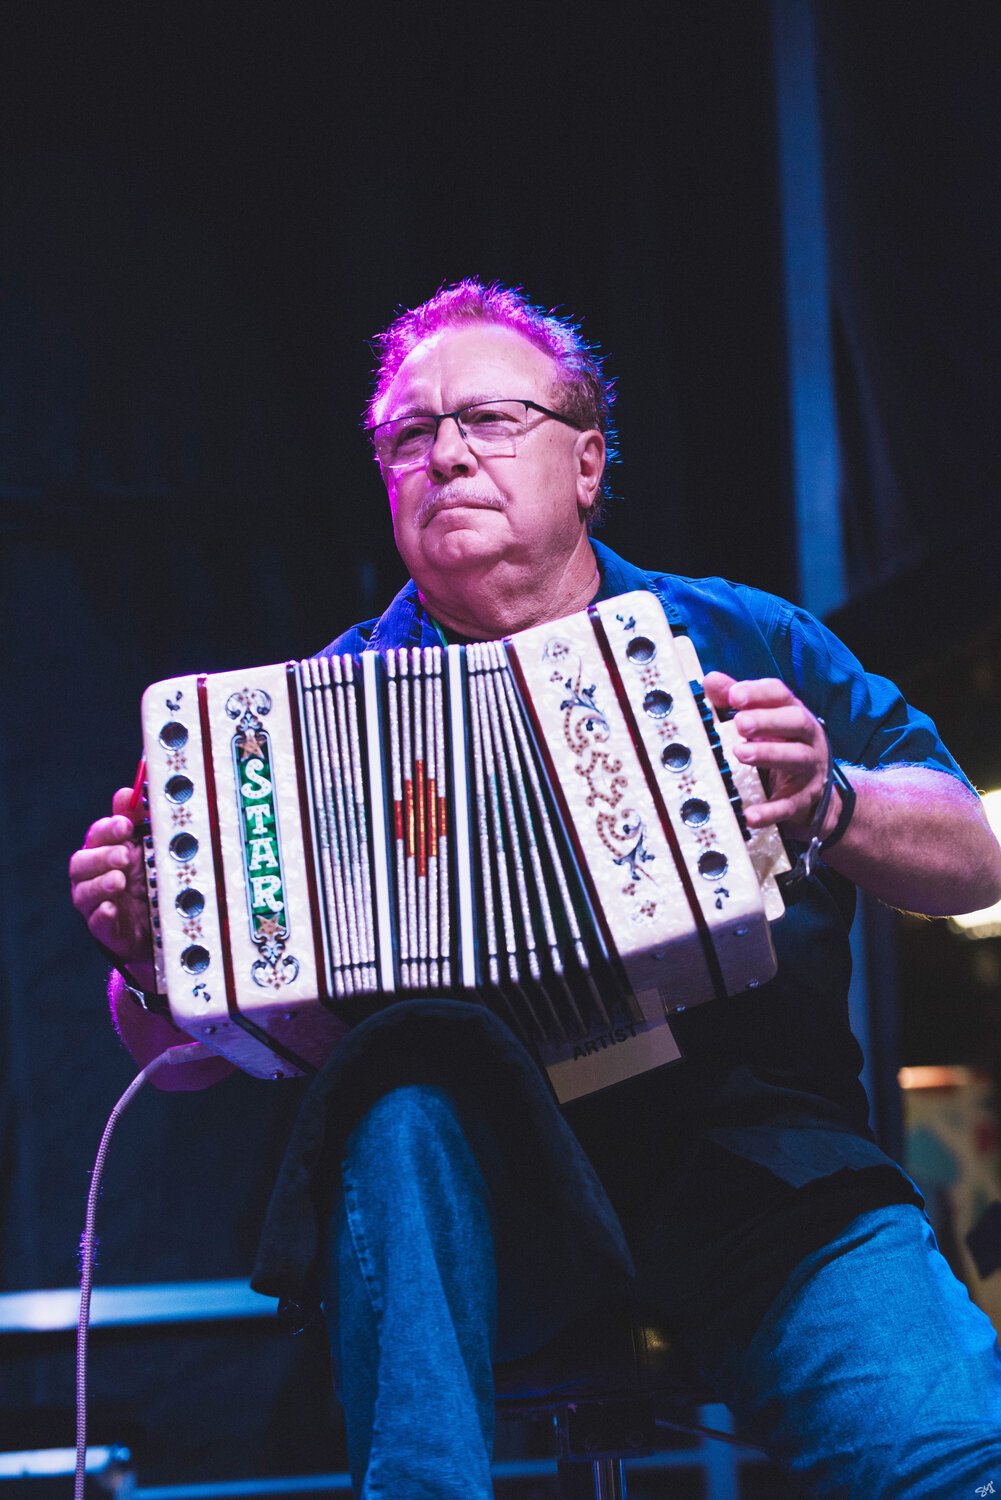 The acordian player for The Boys, a Polish-style polka band.